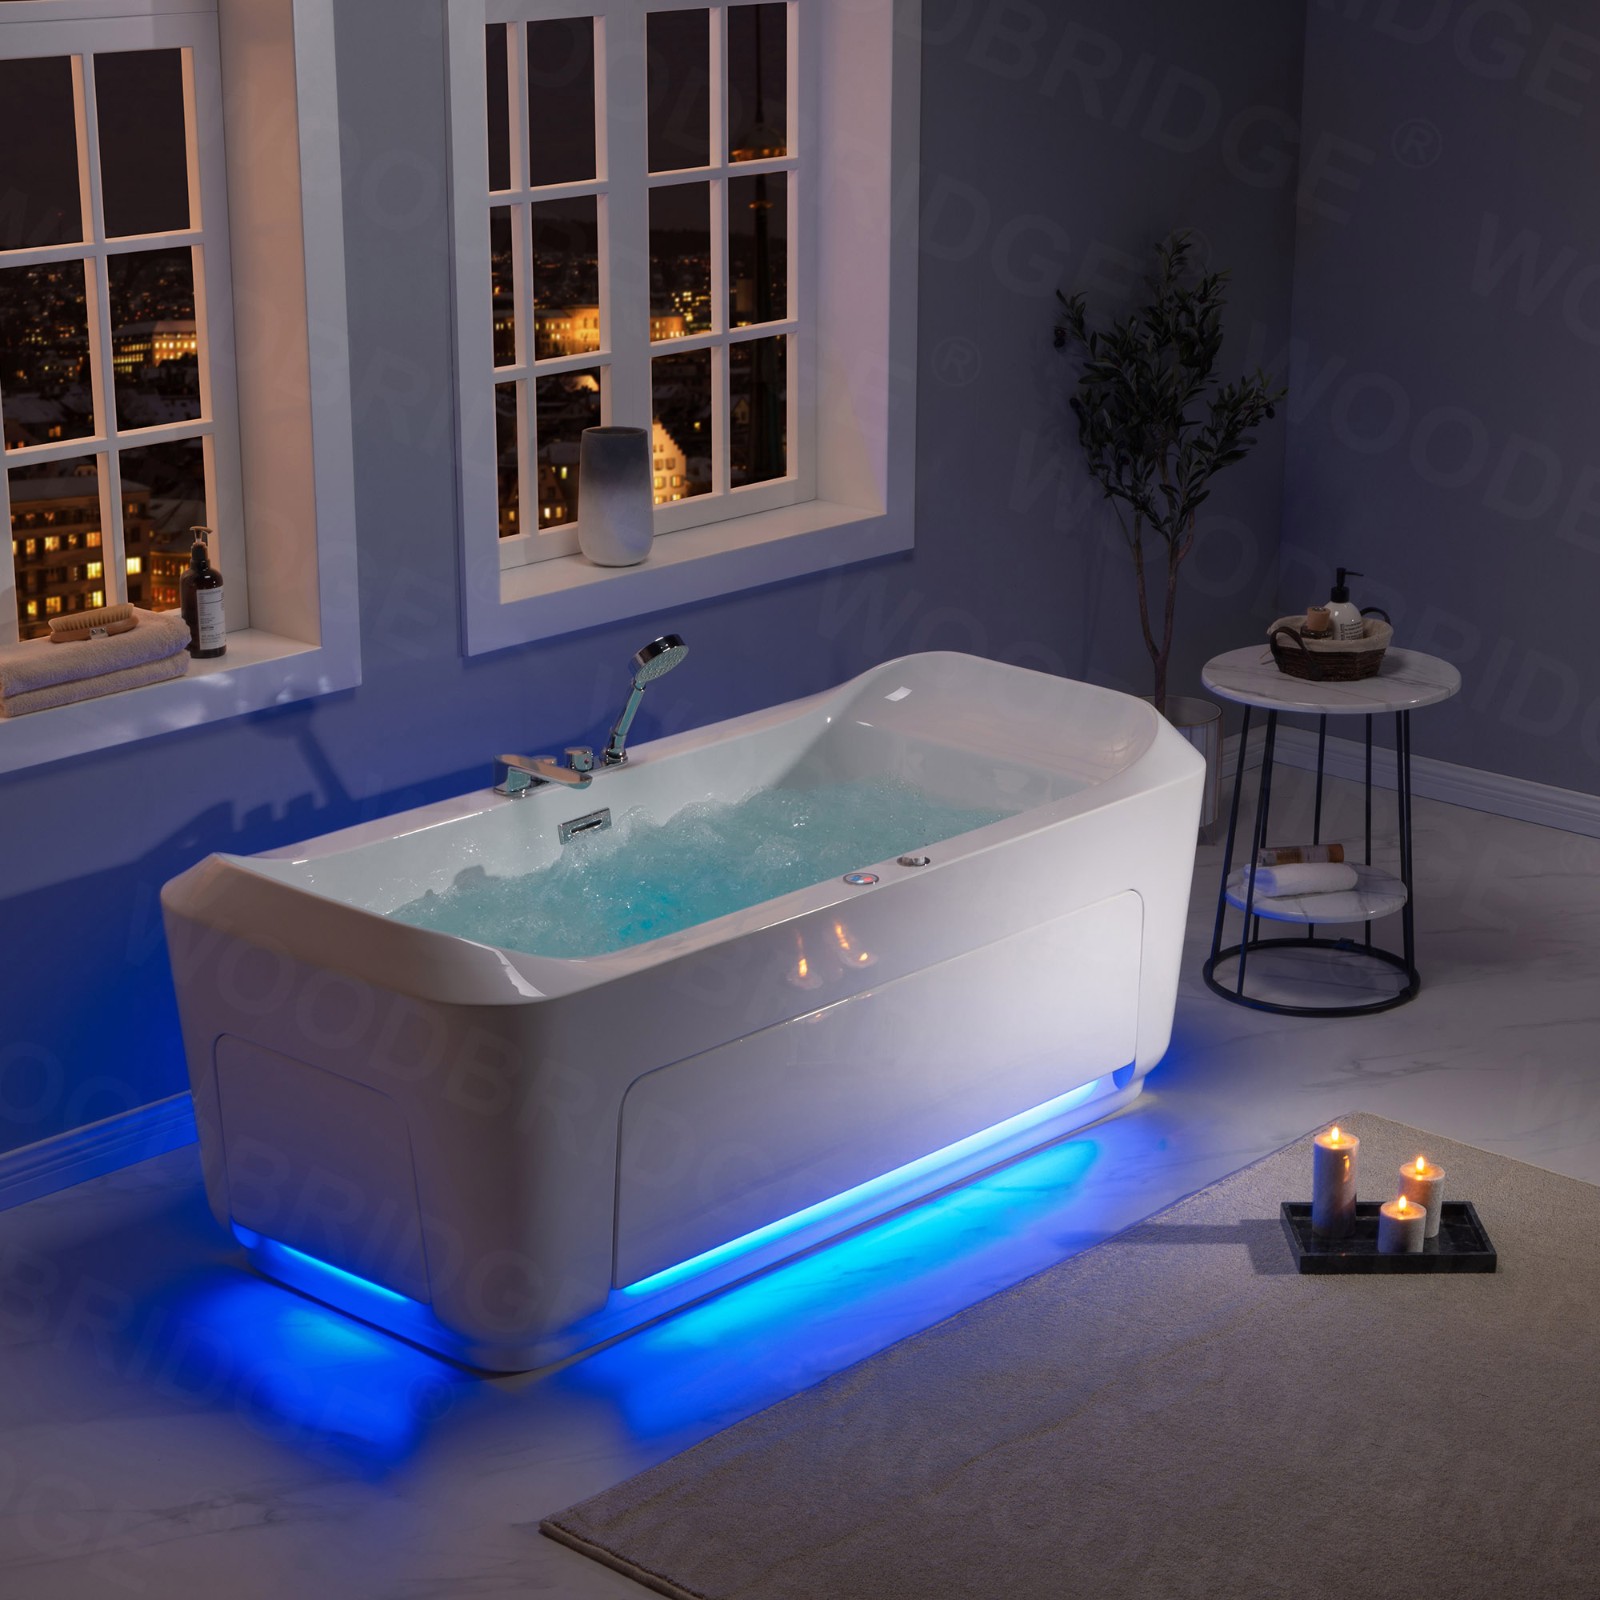  1 Person Freestanding Massage Hydrotherapy Bathtub Tub Hot Tub Spa, with Inline Heater. BTS-0092_9079